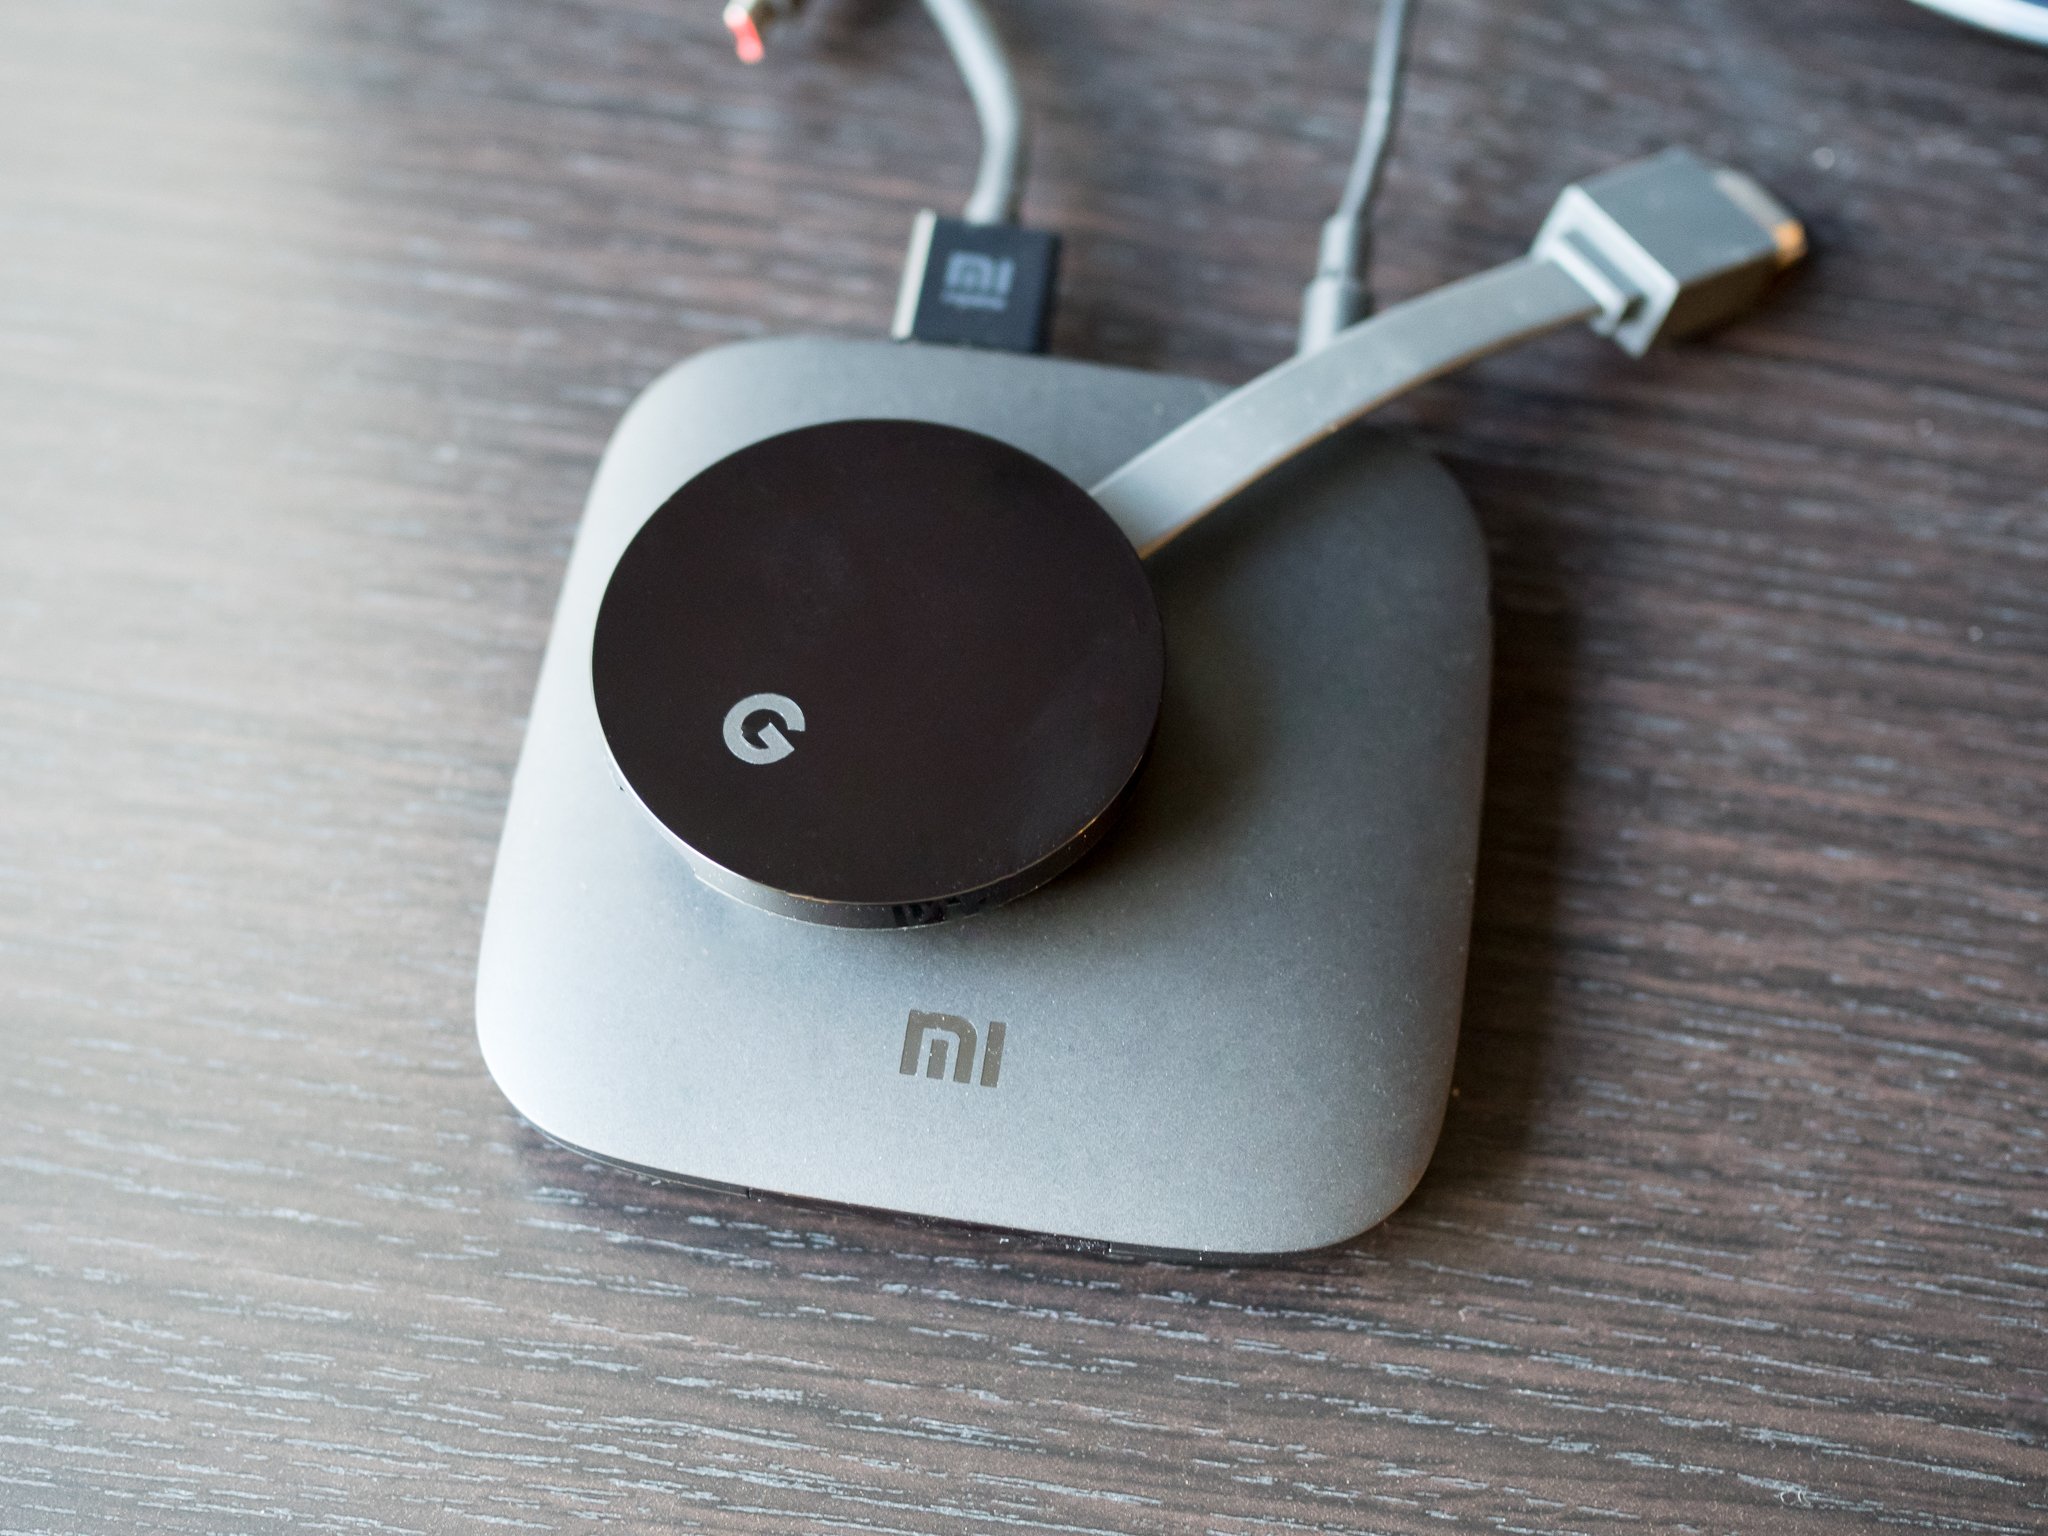 Chromecast Ultra vs. Mi Box: Which should you buy? | Android Central